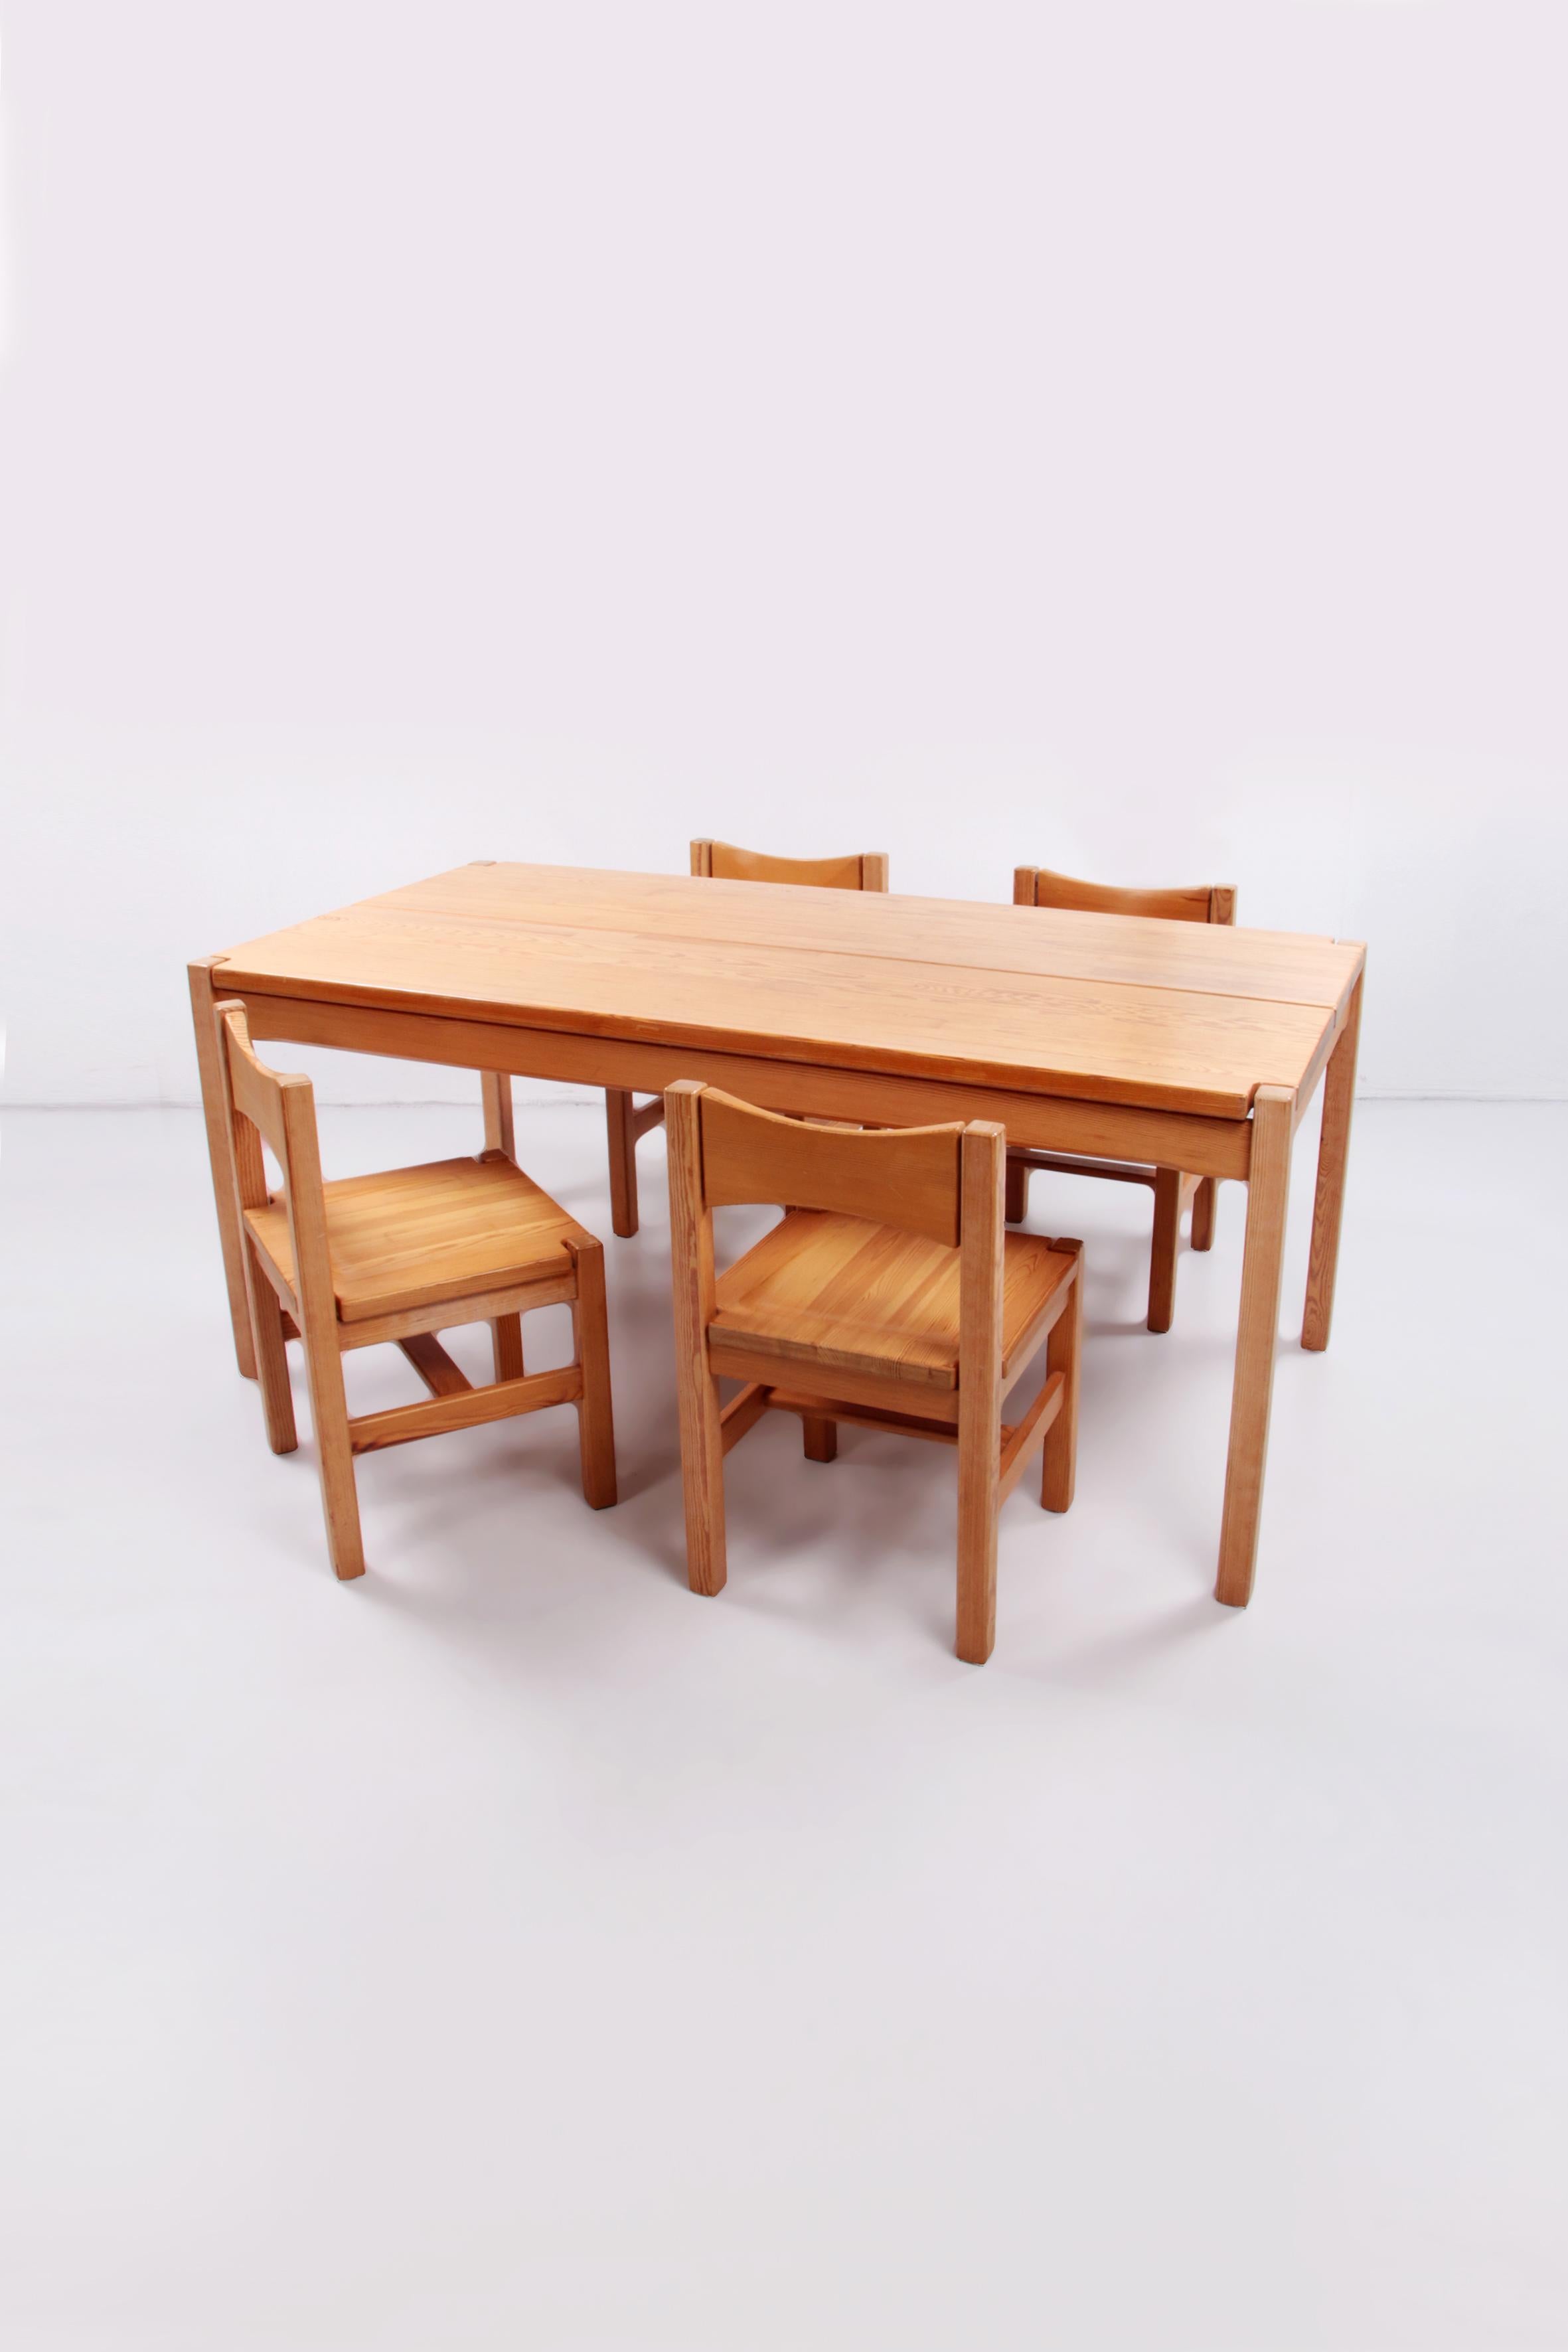 Ilmari Tapiovaara Dining table with 4 chairs for Laukaan Pu, 1963


A beautiful dining room set, designed by the Finnish designer Ilmari Tapiovaara in 1963, consists of a dining table, with 4 chairs.

All in solid honey colored pine with very